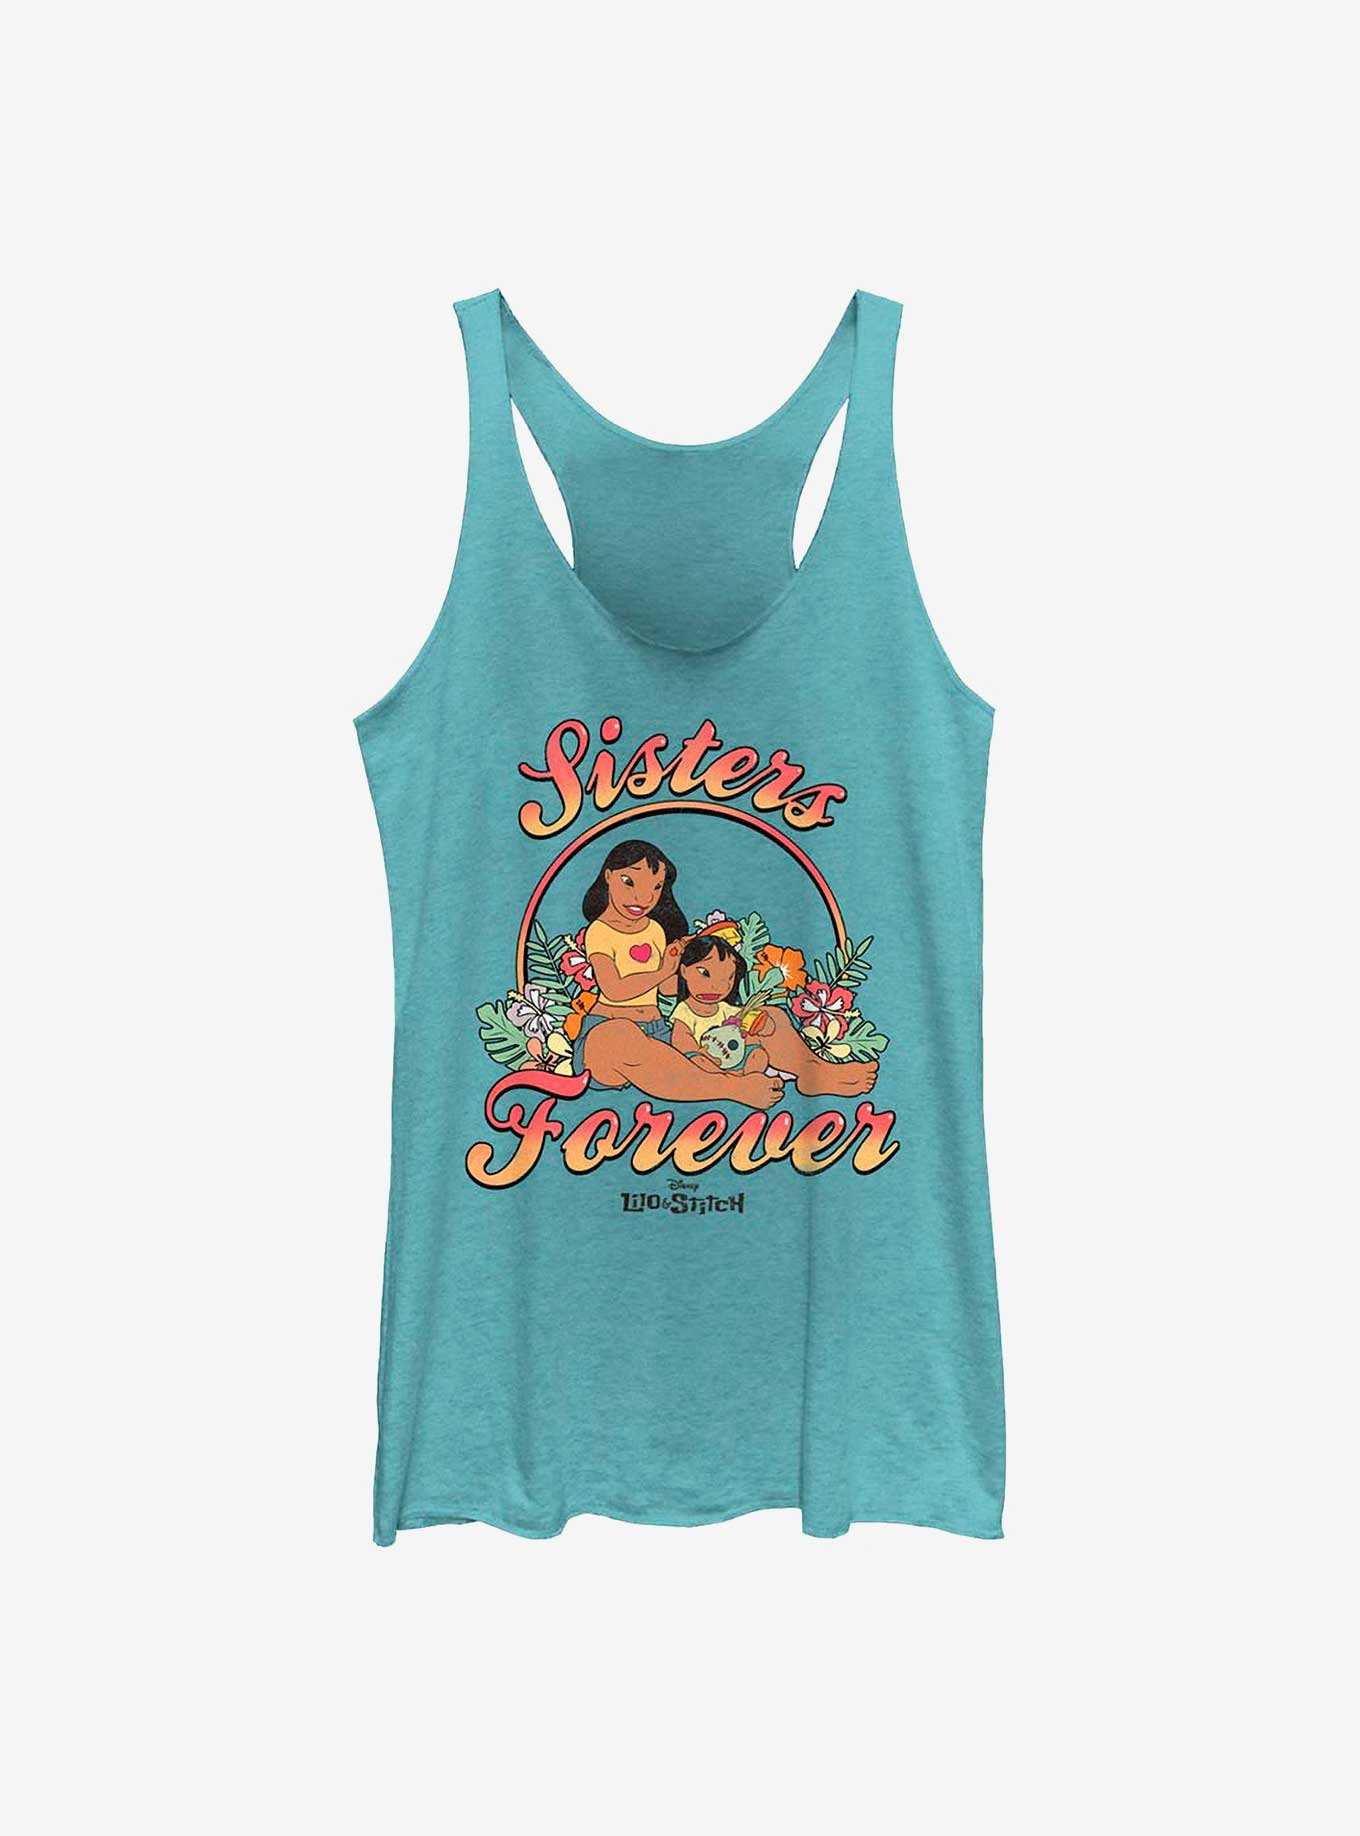 Disney Lilo & Stitch Sisters Forever Girls Tank, , hi-res